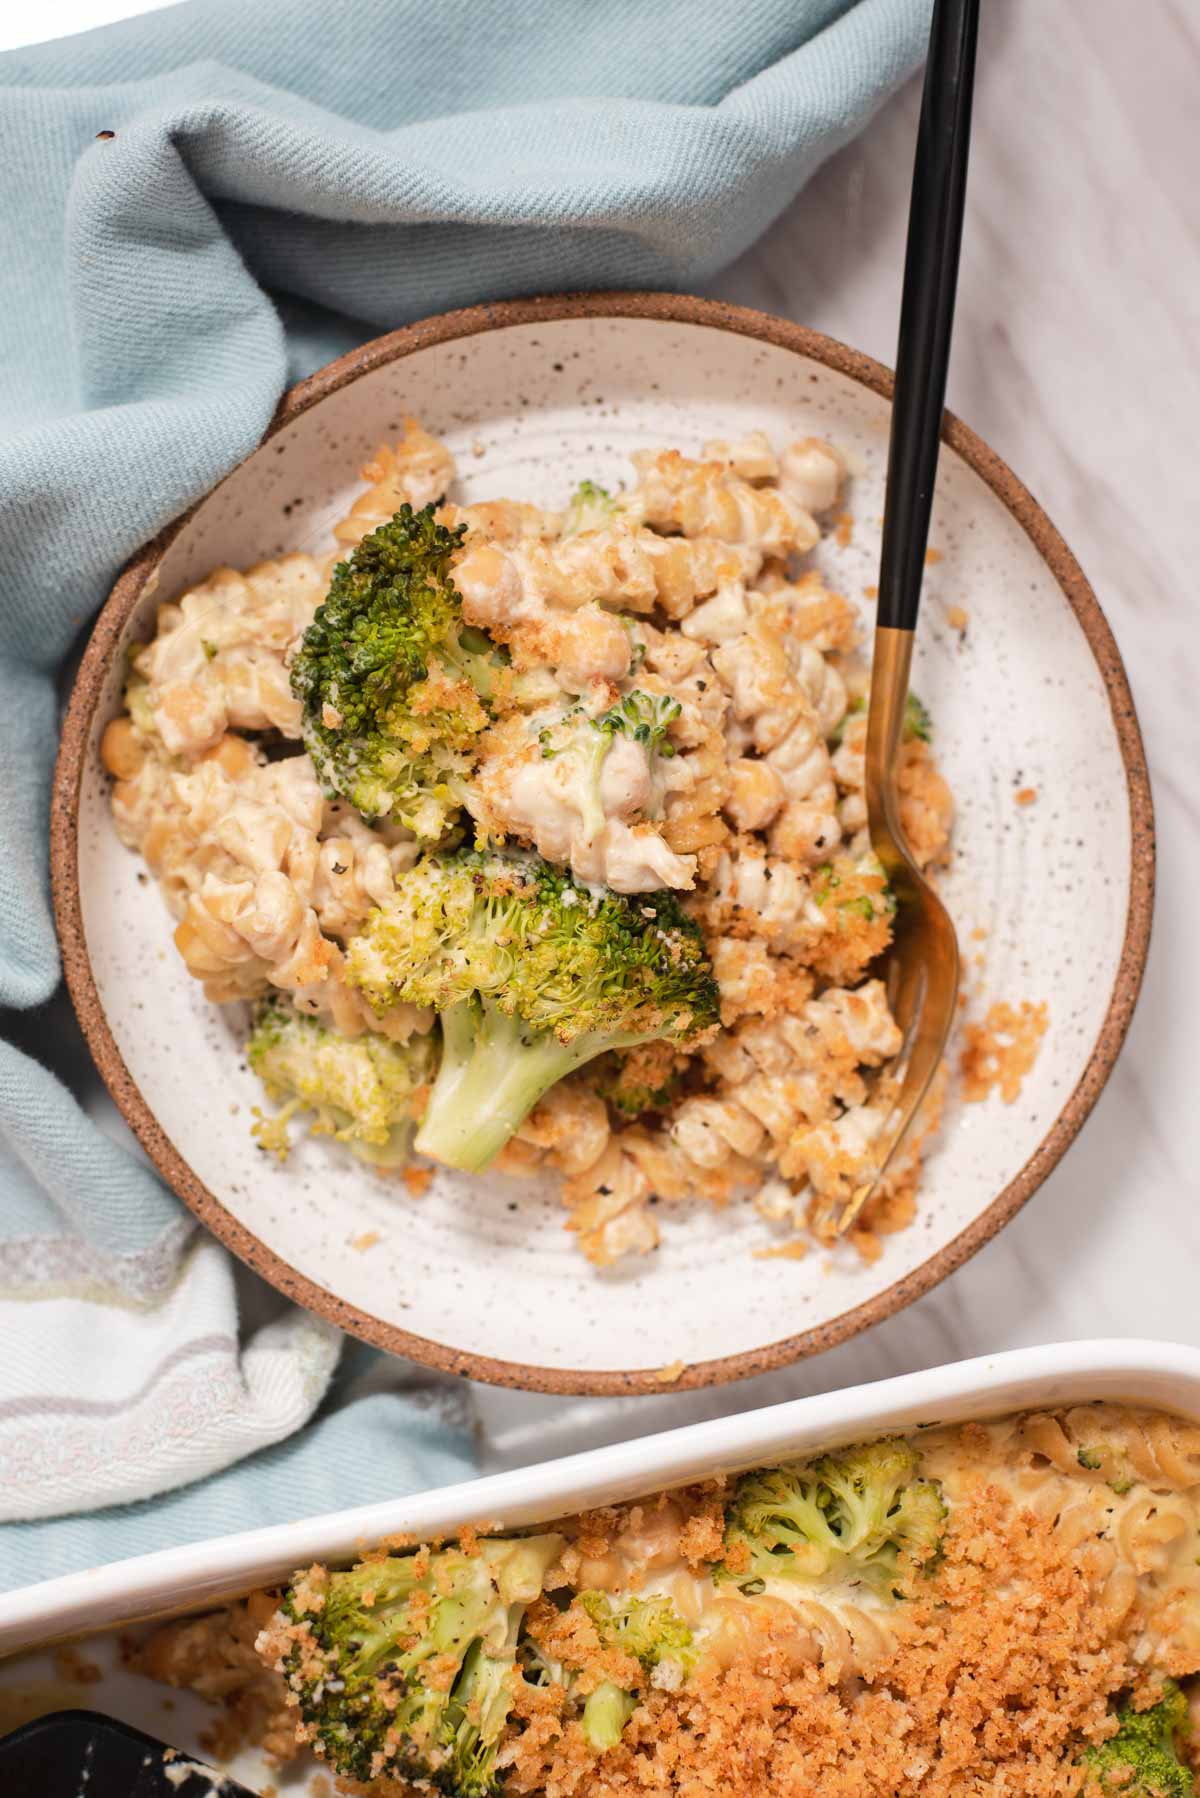 Overhead view of white bowl filled with pasta and broccoli.